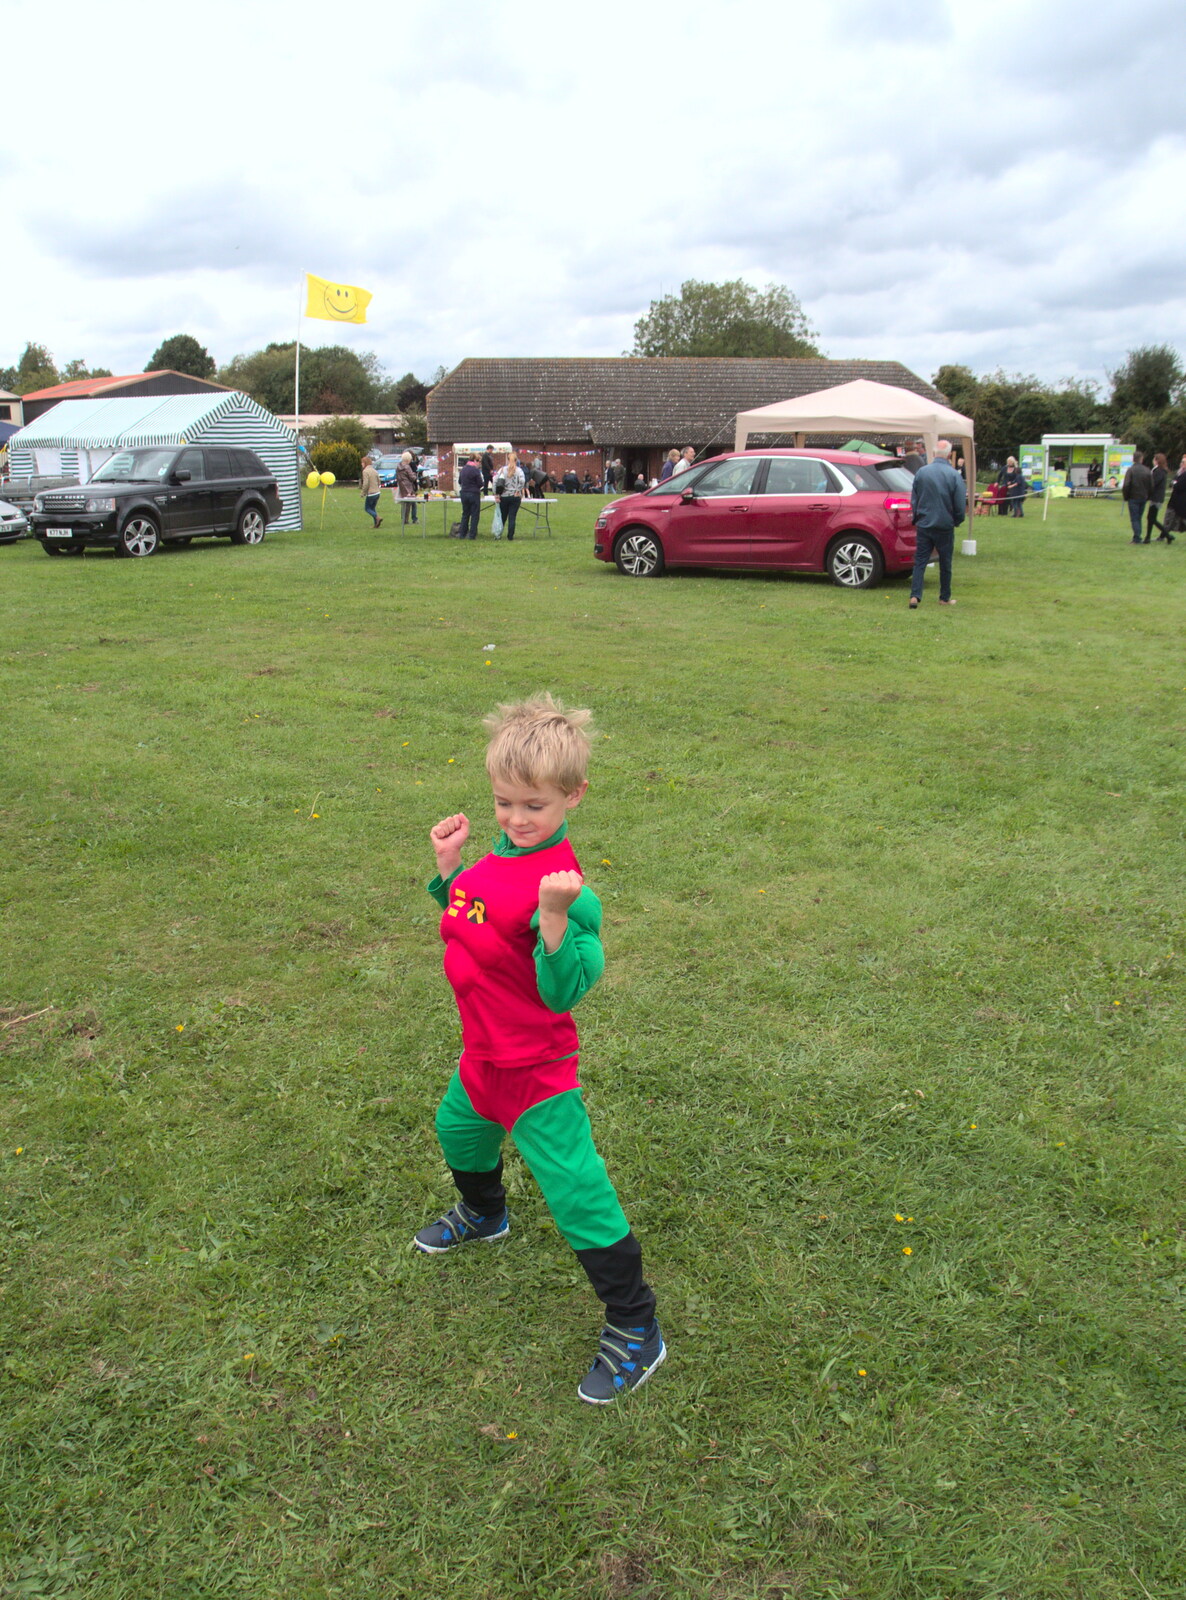 Harry finds a super-hero costume from A Summer Fete, Palgrave, Suffolk - 10th September 2017